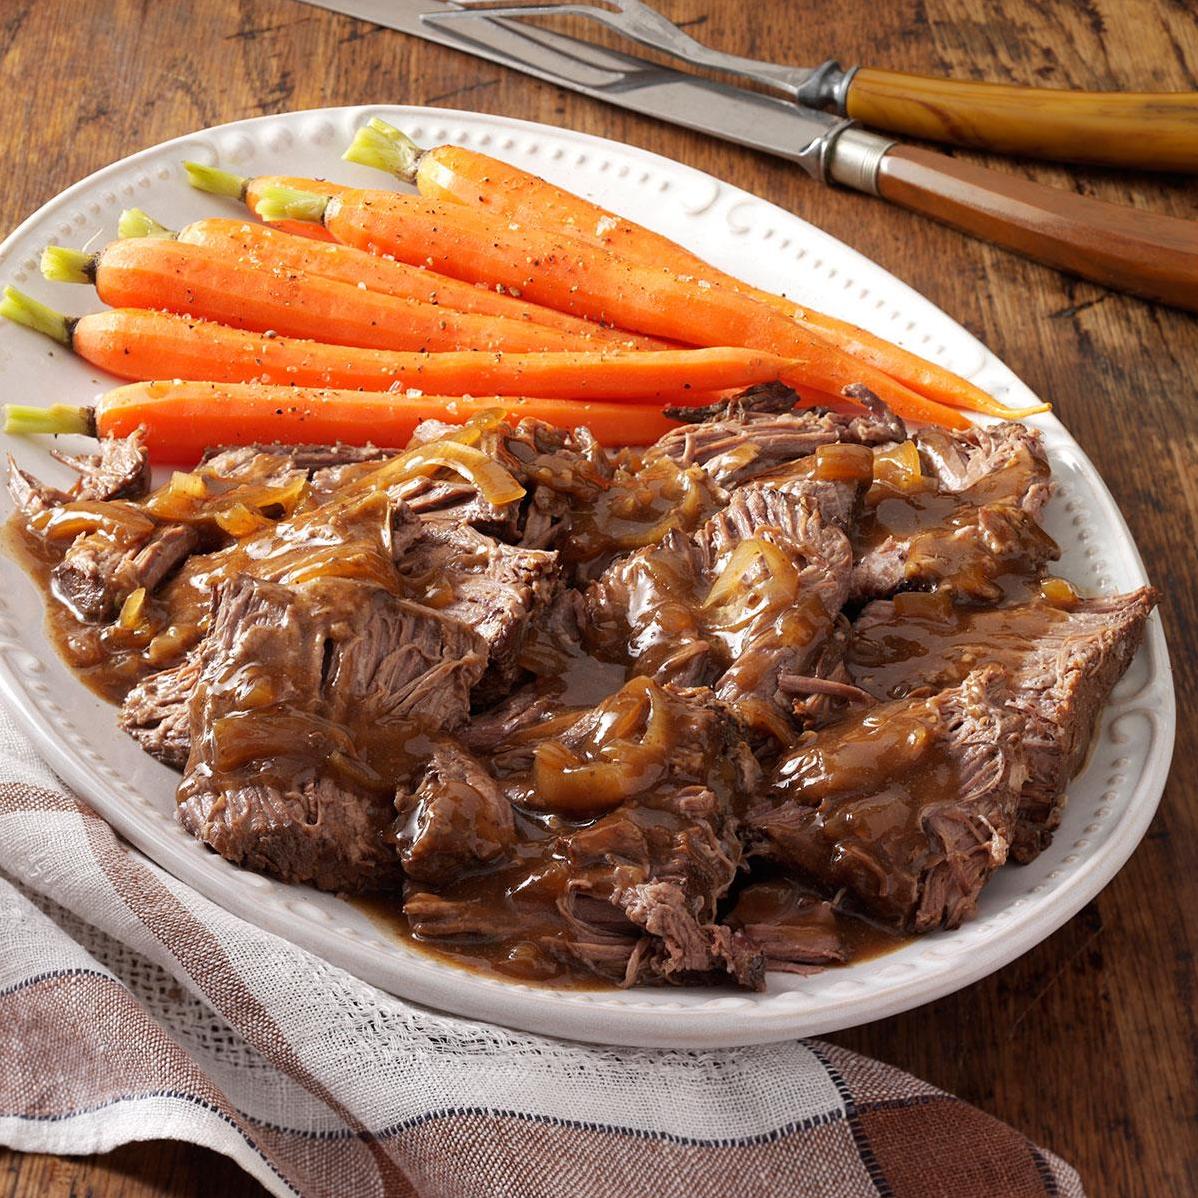  A savory, tender beef roast infused with rich coffee flavor.